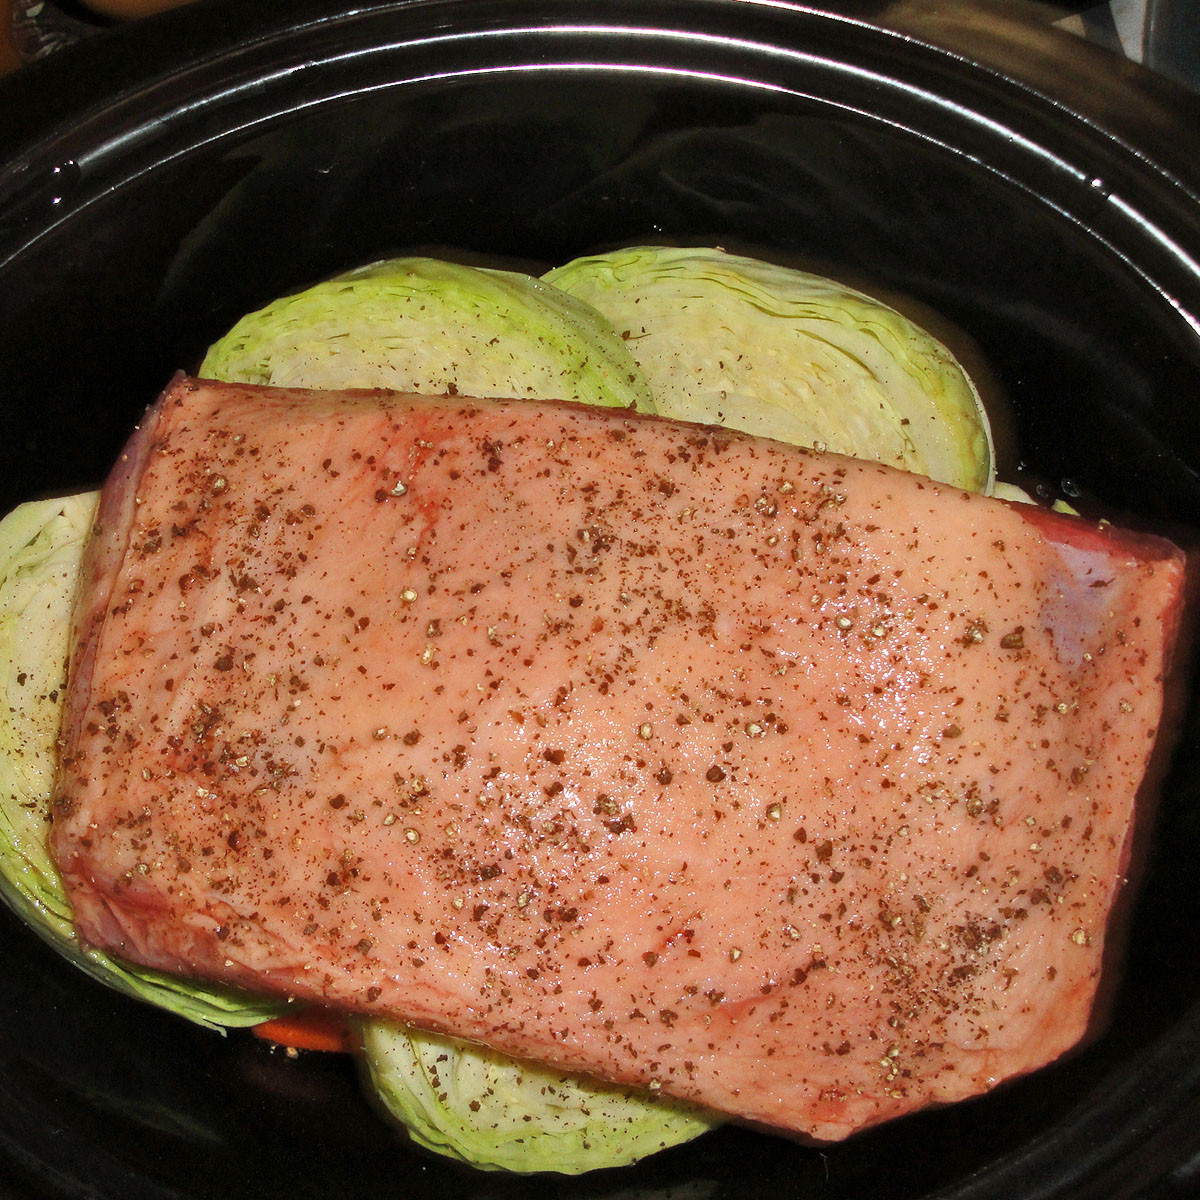 Corned Beef And Cabbage In Crock Pot
 Crock Pot Corned Beef and Cabbage